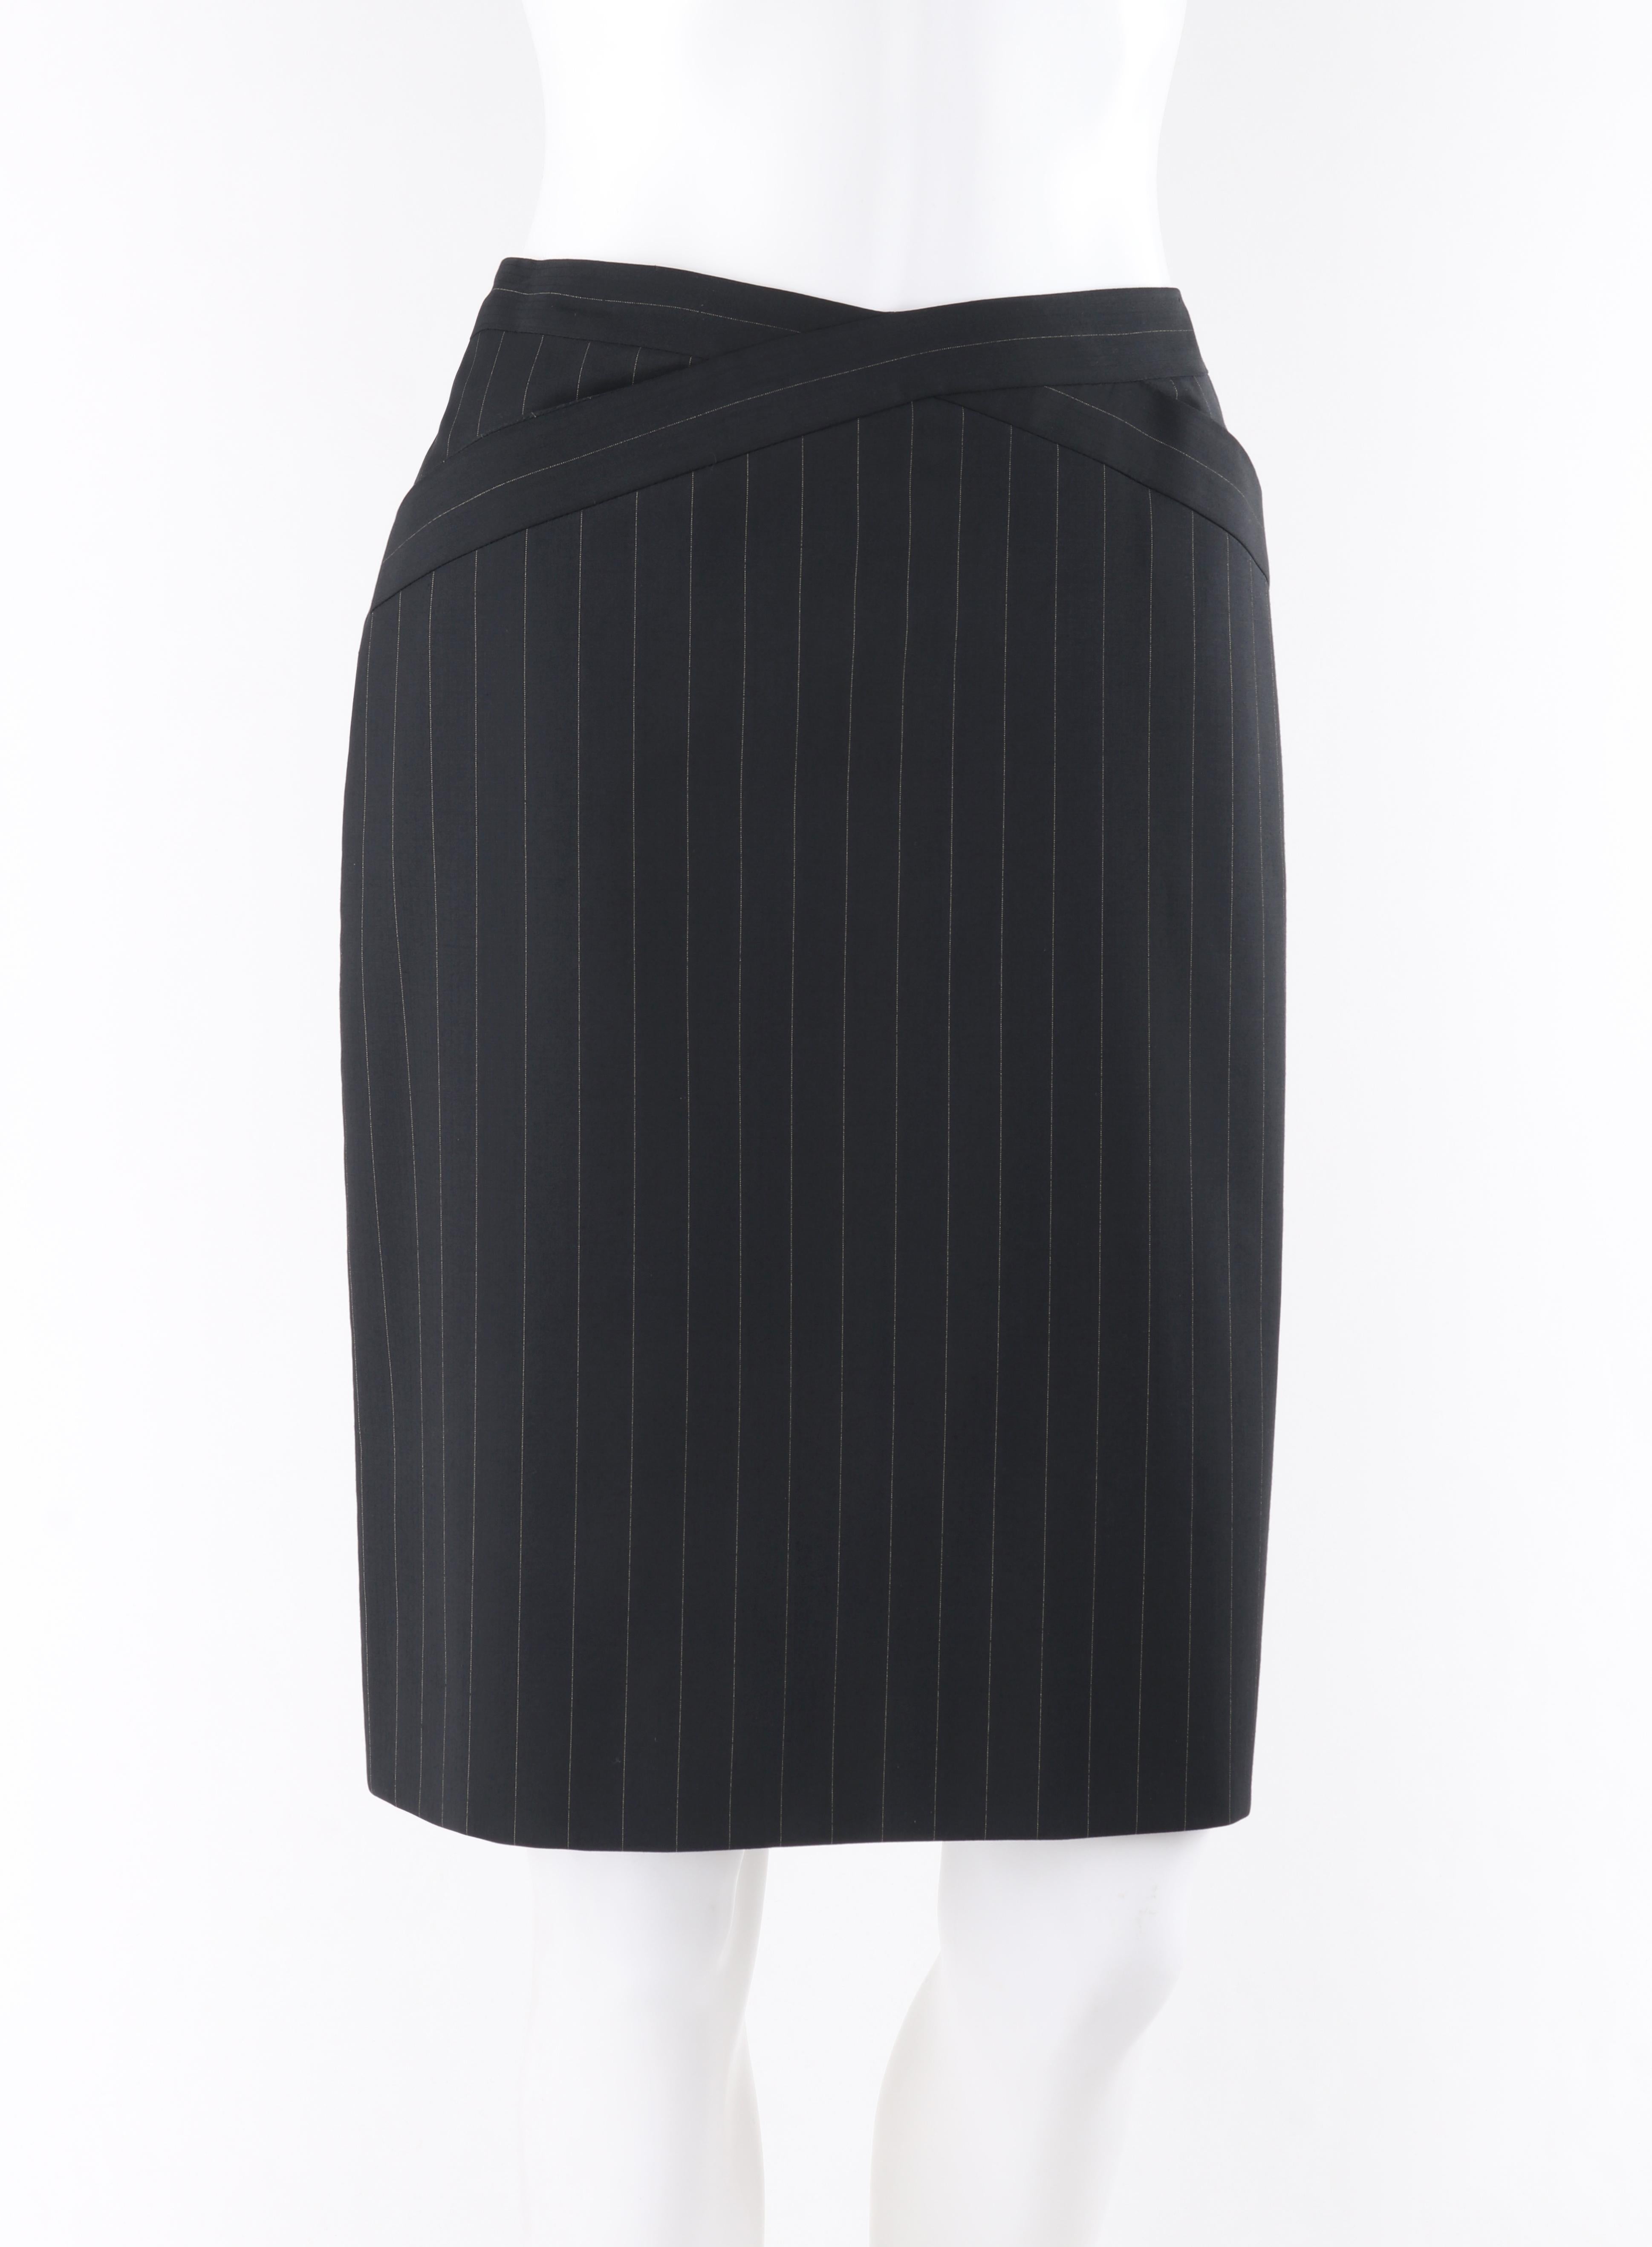 GIVENCHY Couture S/S 1999 ALEXANDER McQUEEN Black Pinstripe Fitted Pencil Skirt

Brand / Manufacturer: Givenchy 
Collection: S/S 1999
Designer: Alexander McQueen
Style: Pencil skirt
Color(s): Black and gold
Lined: Yes
Marked Fabric Content: “99%